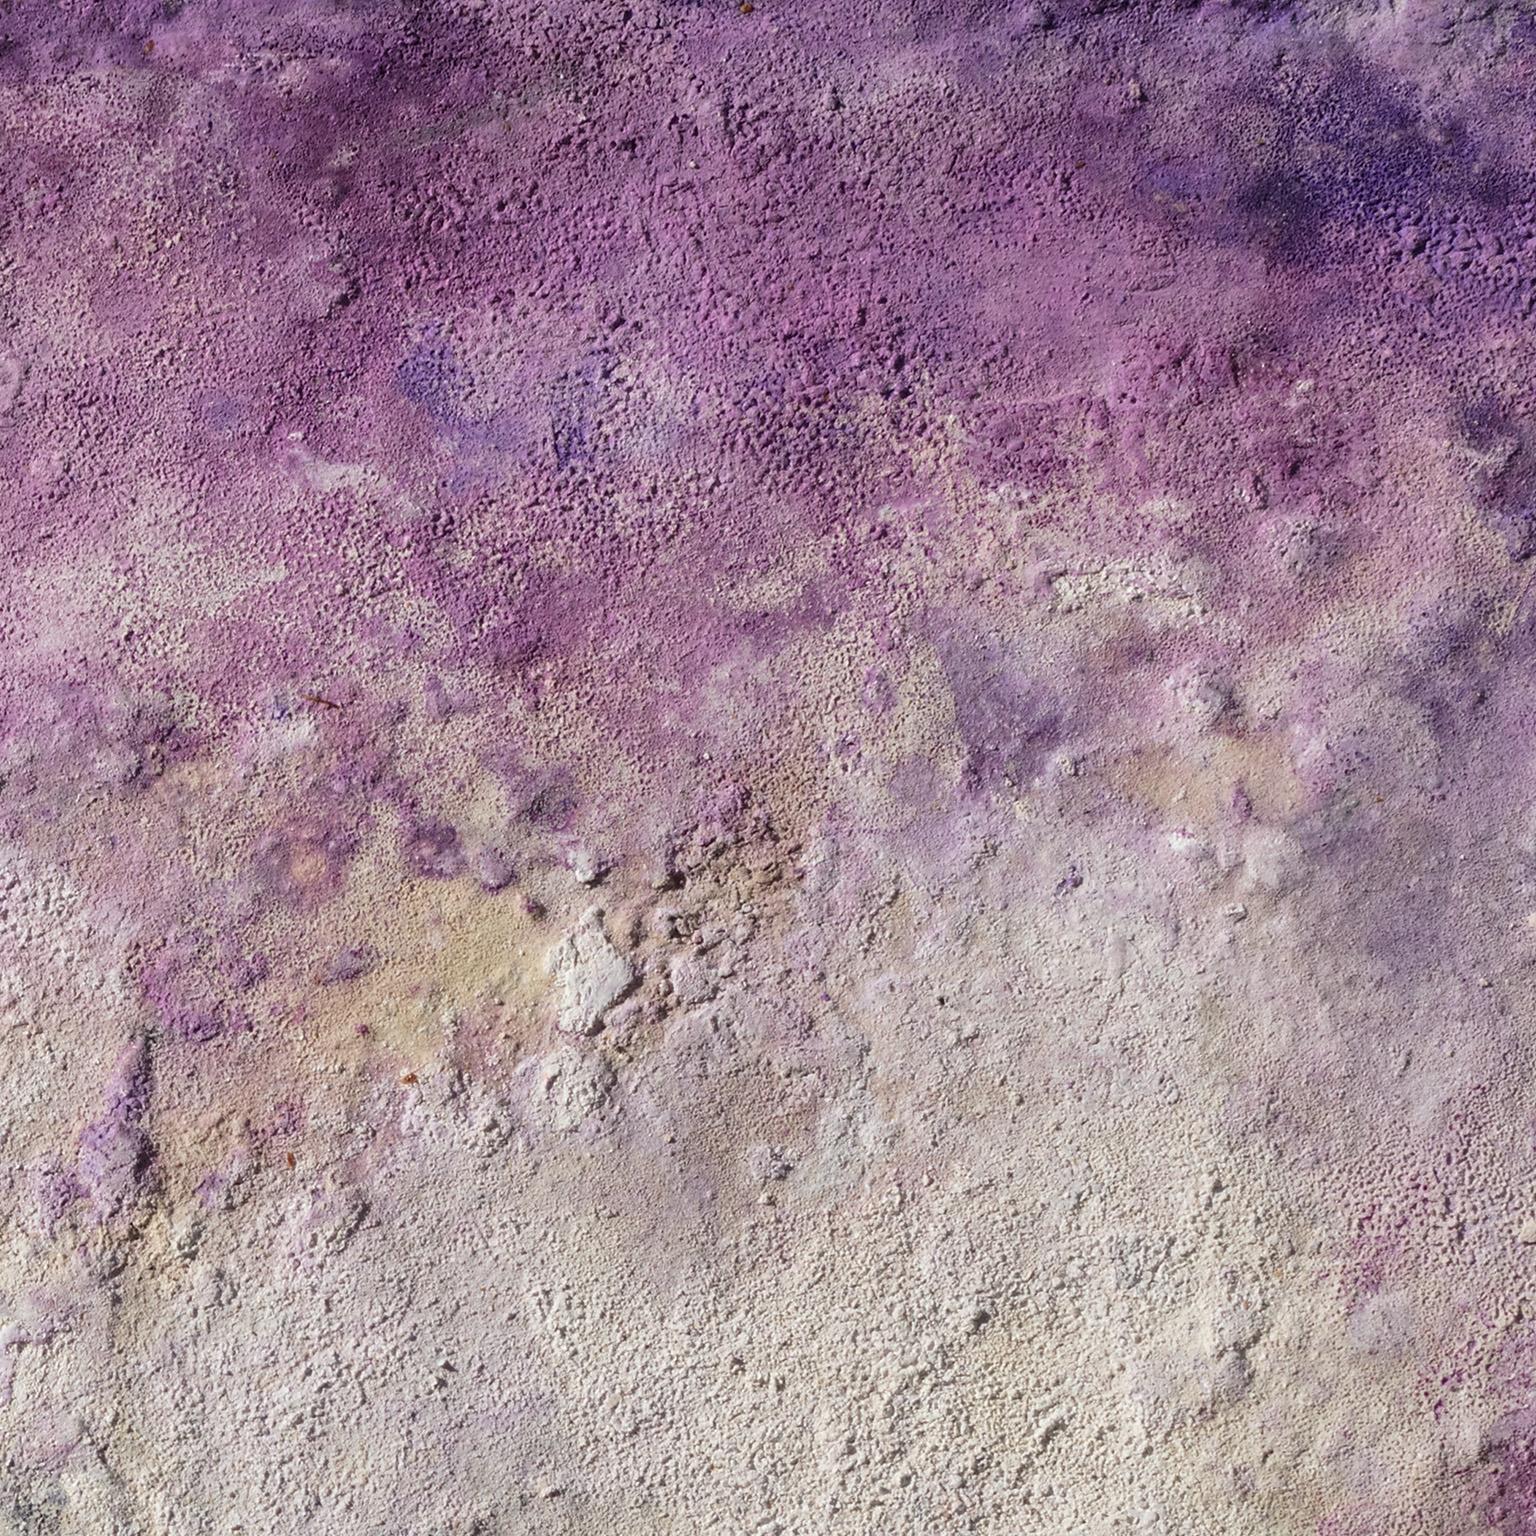 Terra Bruciata (Scorched Earth) - Small Abstract Purple and Red Painting 2